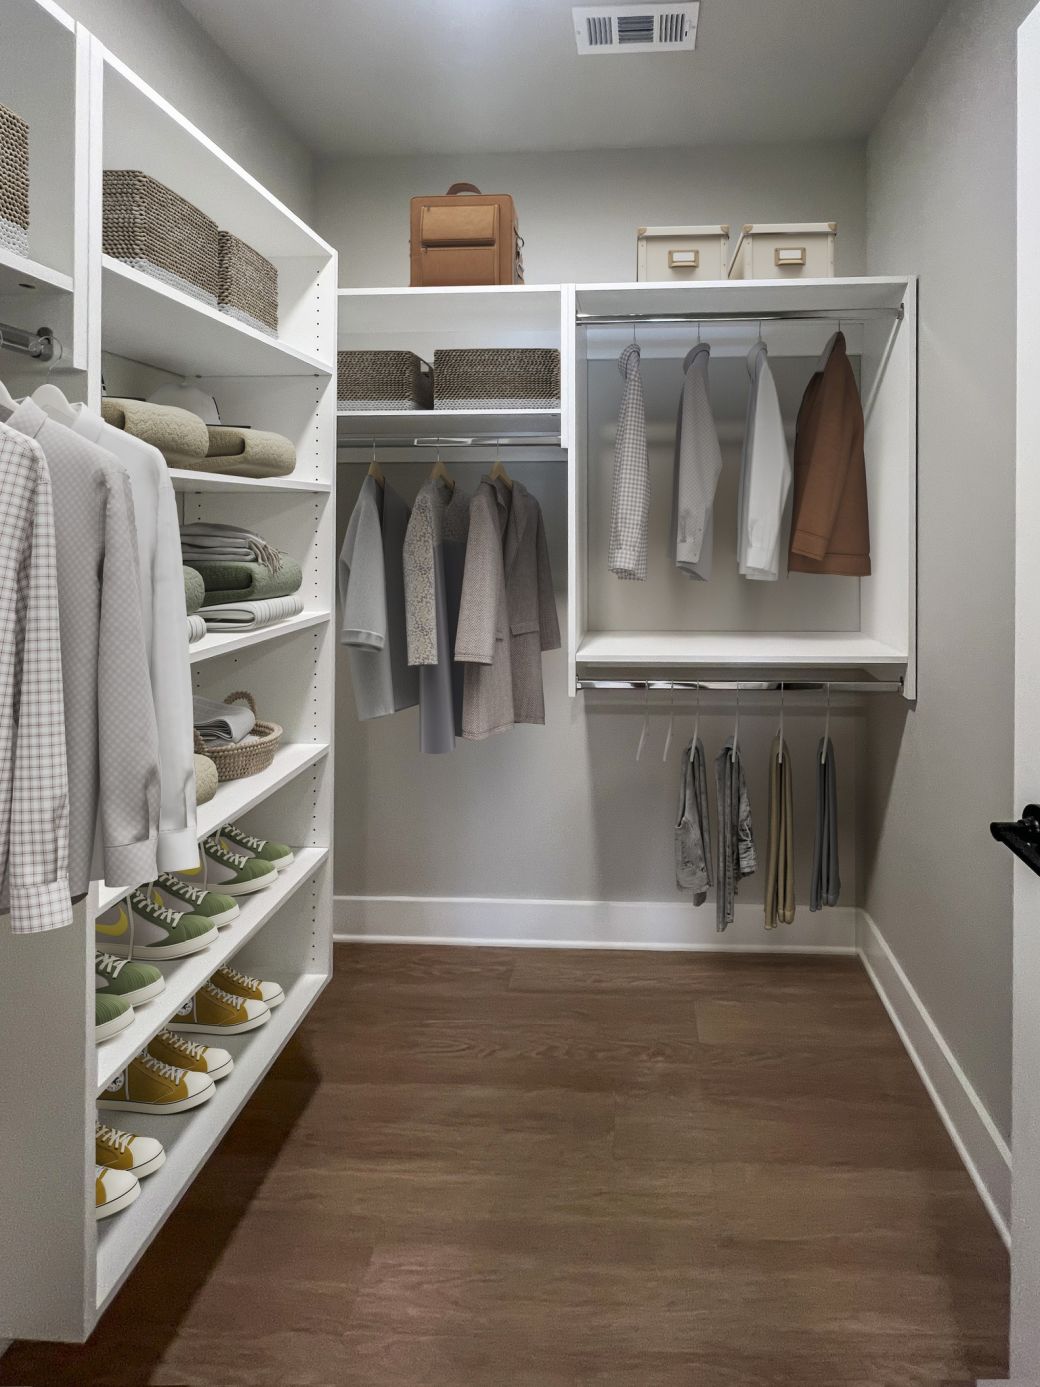 Carraway Village large walk-in closet with built-in storage